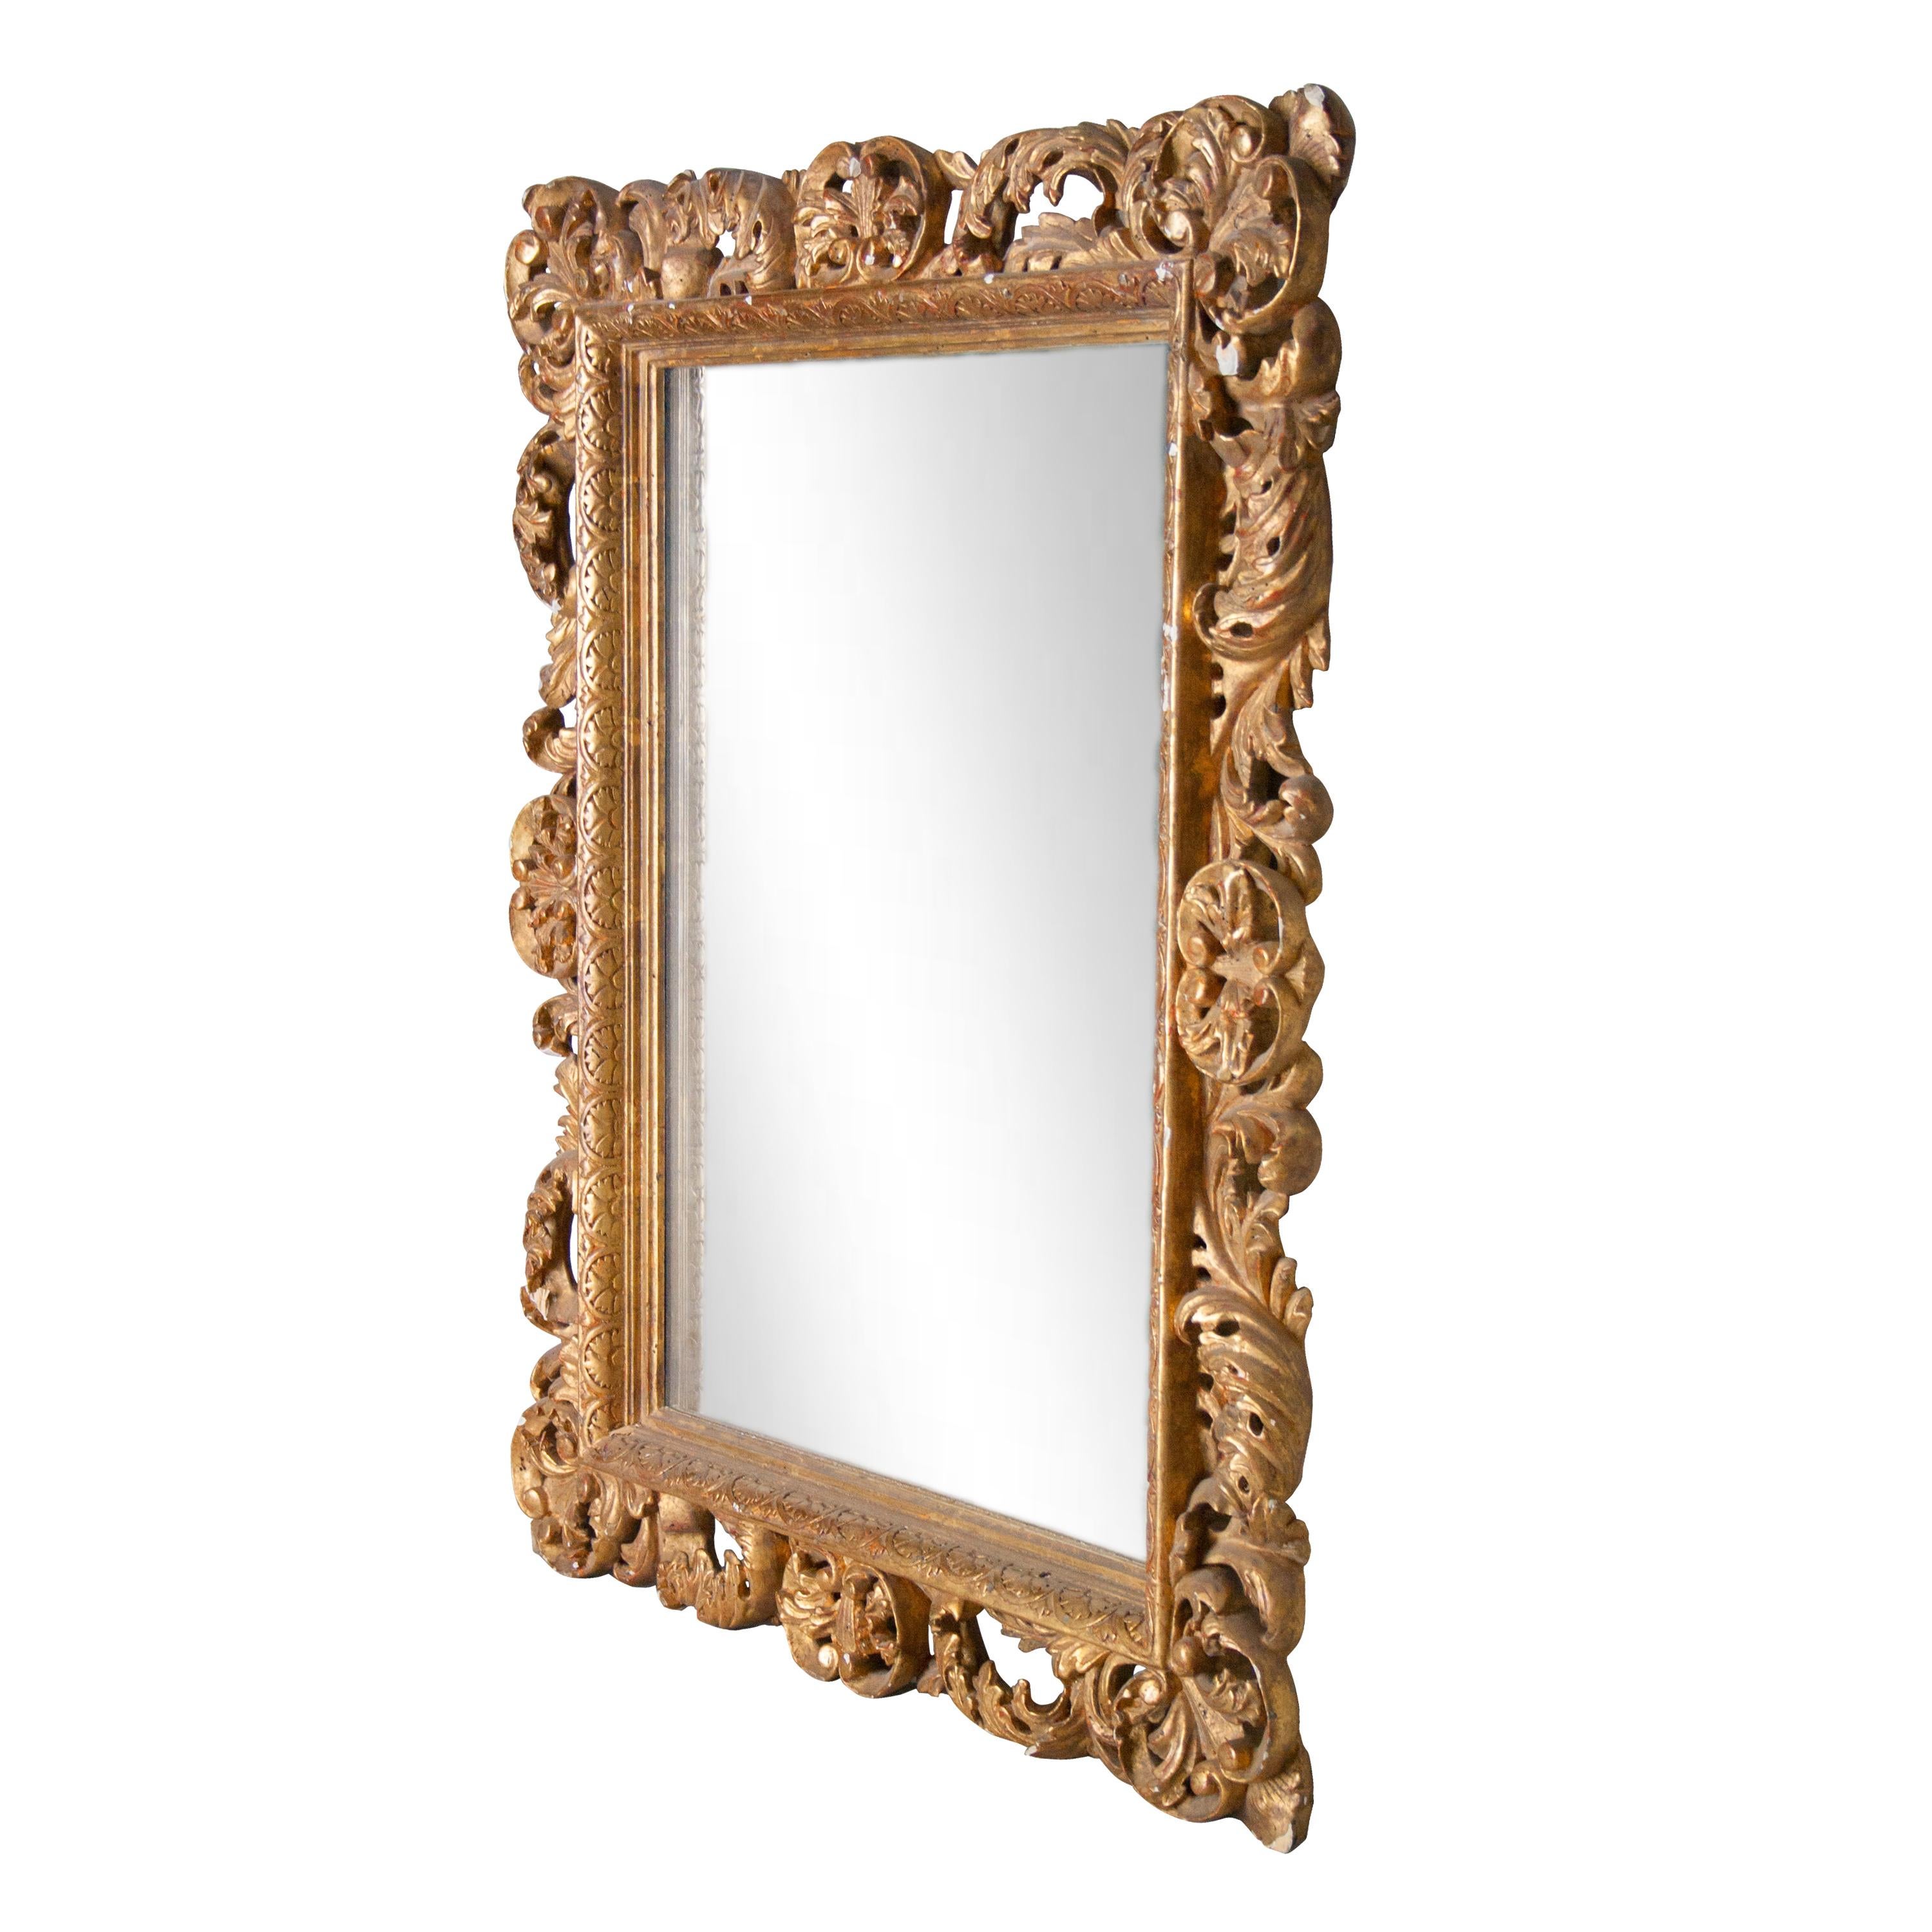 Neoclassical baroque style handcrafted mirror. Hand carved wooden structure with gold foil finished, Spain, 1970.